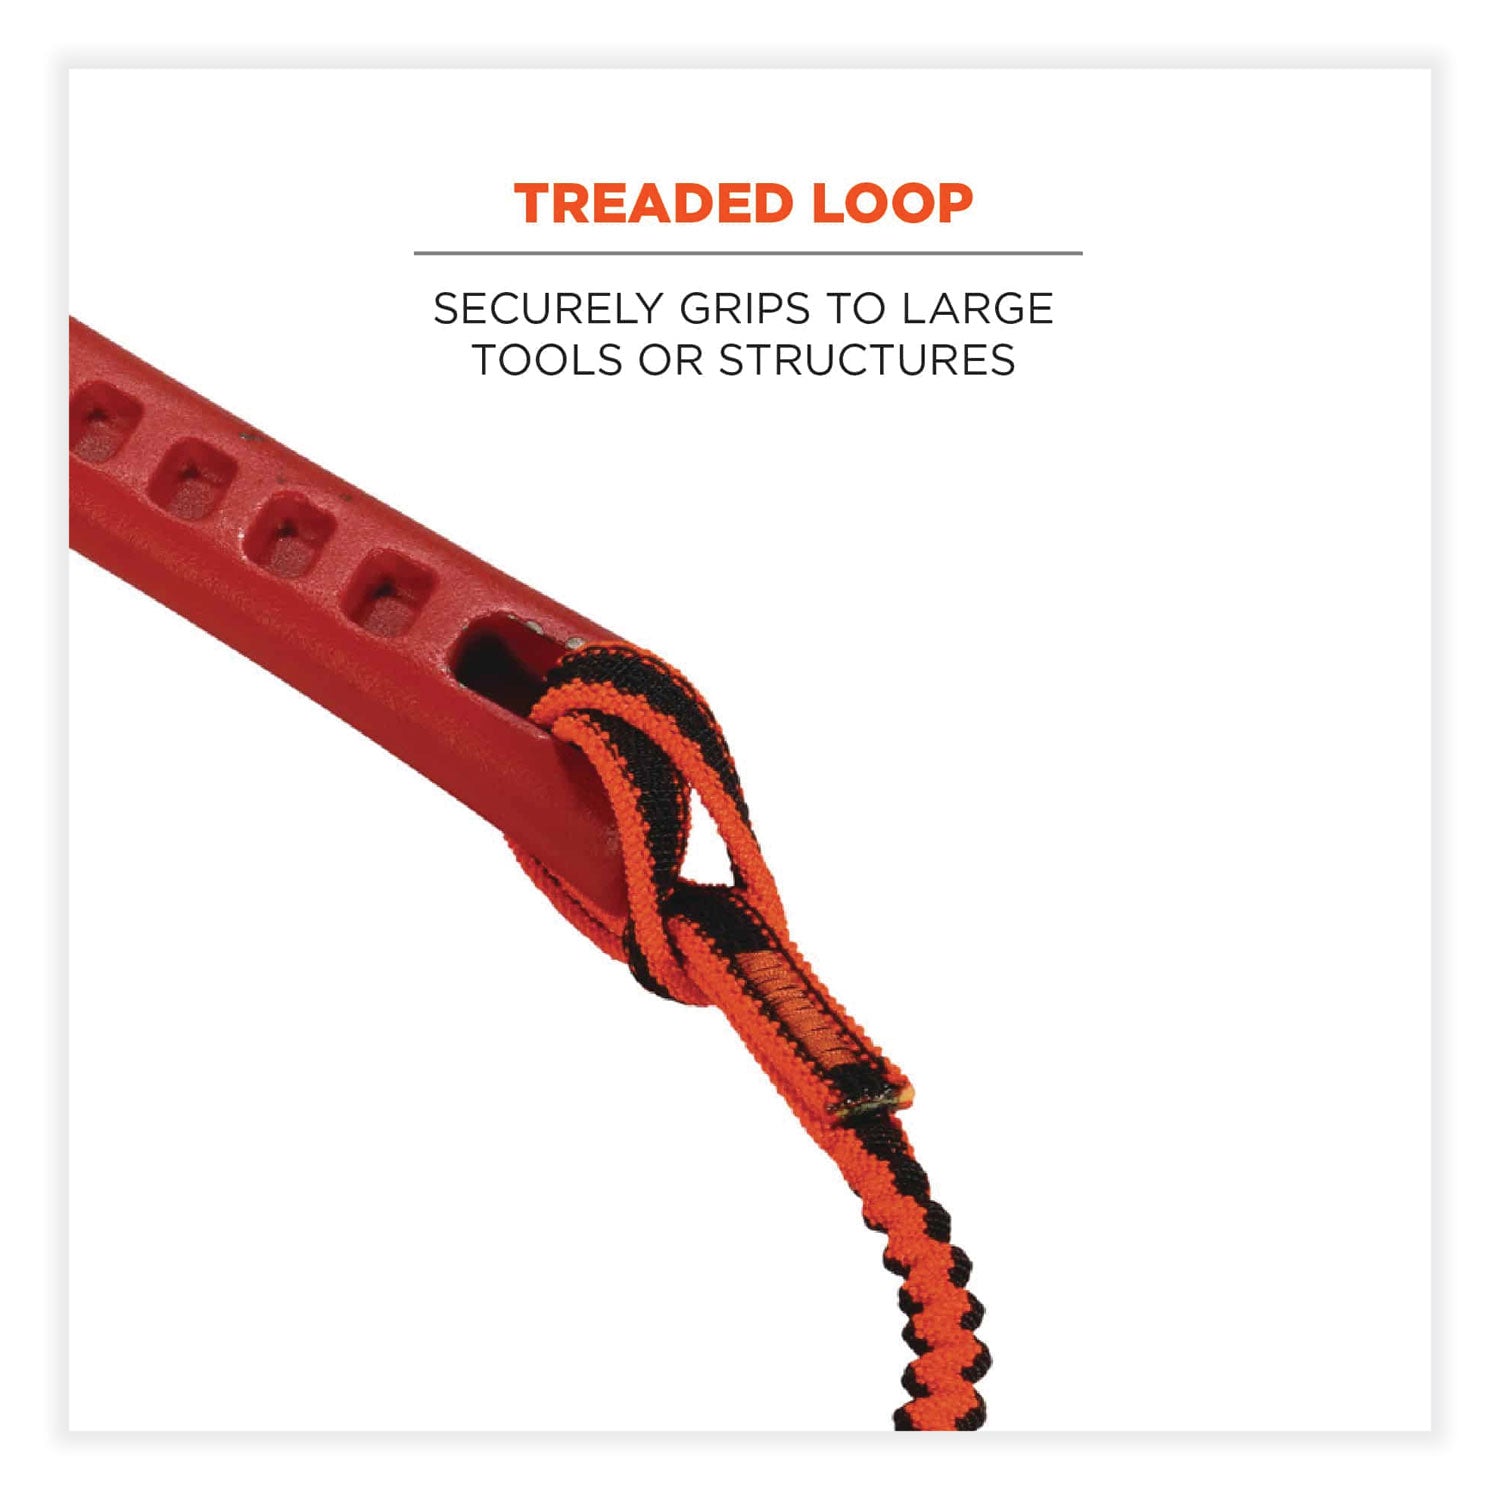 squids-3101fx-tool-lanyard-w-stainless-steel-carabiner-+-loop-15-lb-max-work-cap-38-to-48-ships-in-1-3-business-days_ego19803 - 8